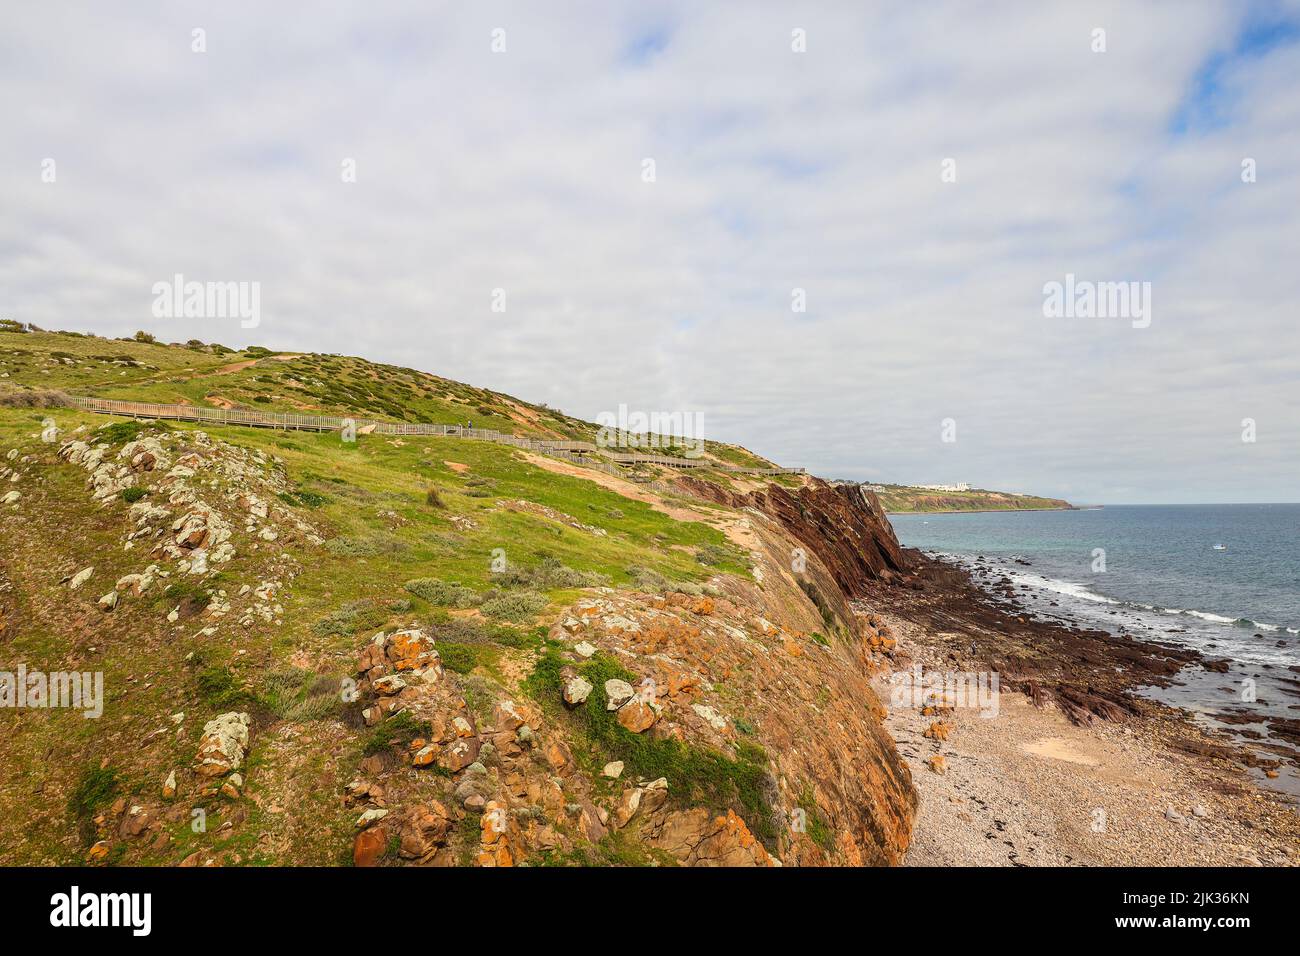 Partial view of Hallet Cove beach in South Australia Stock Photo